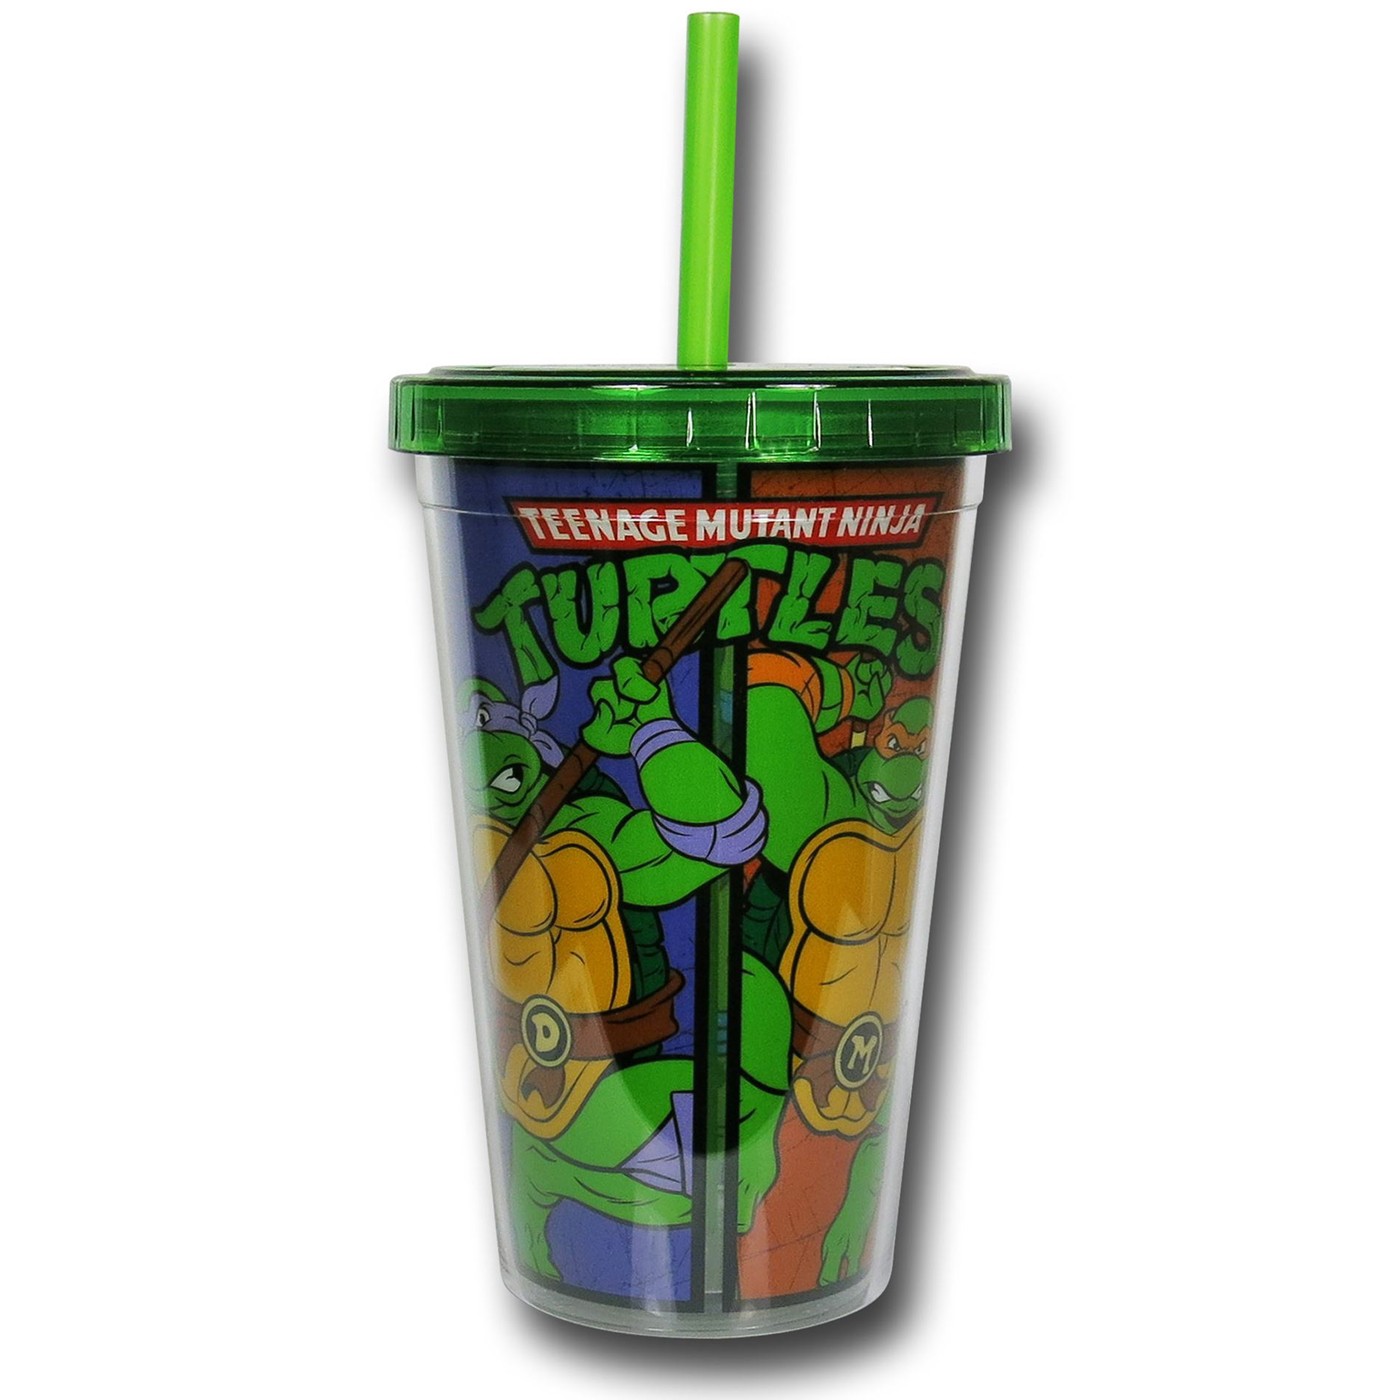 TMNT Color Panels 12oz Acrylic Travel Cup